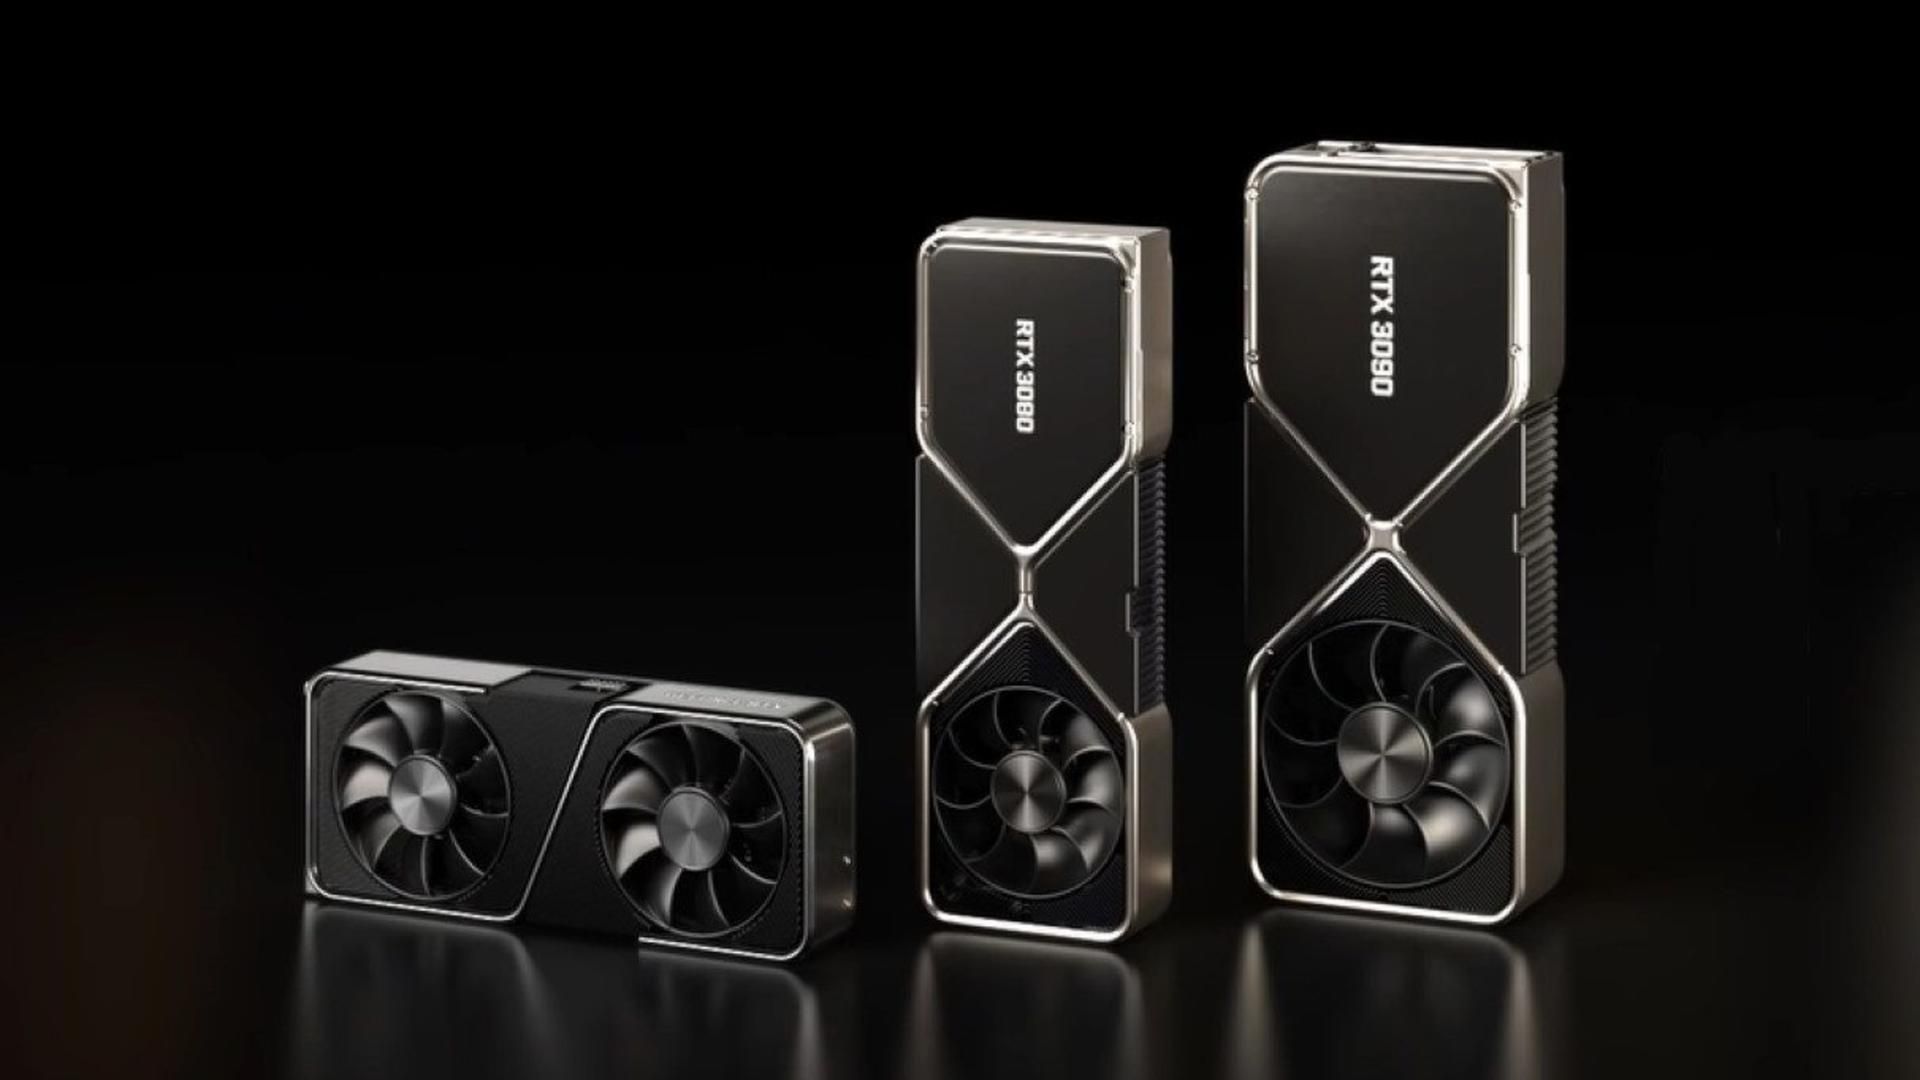 Nvidia RTX 3060 Ti might launch in October